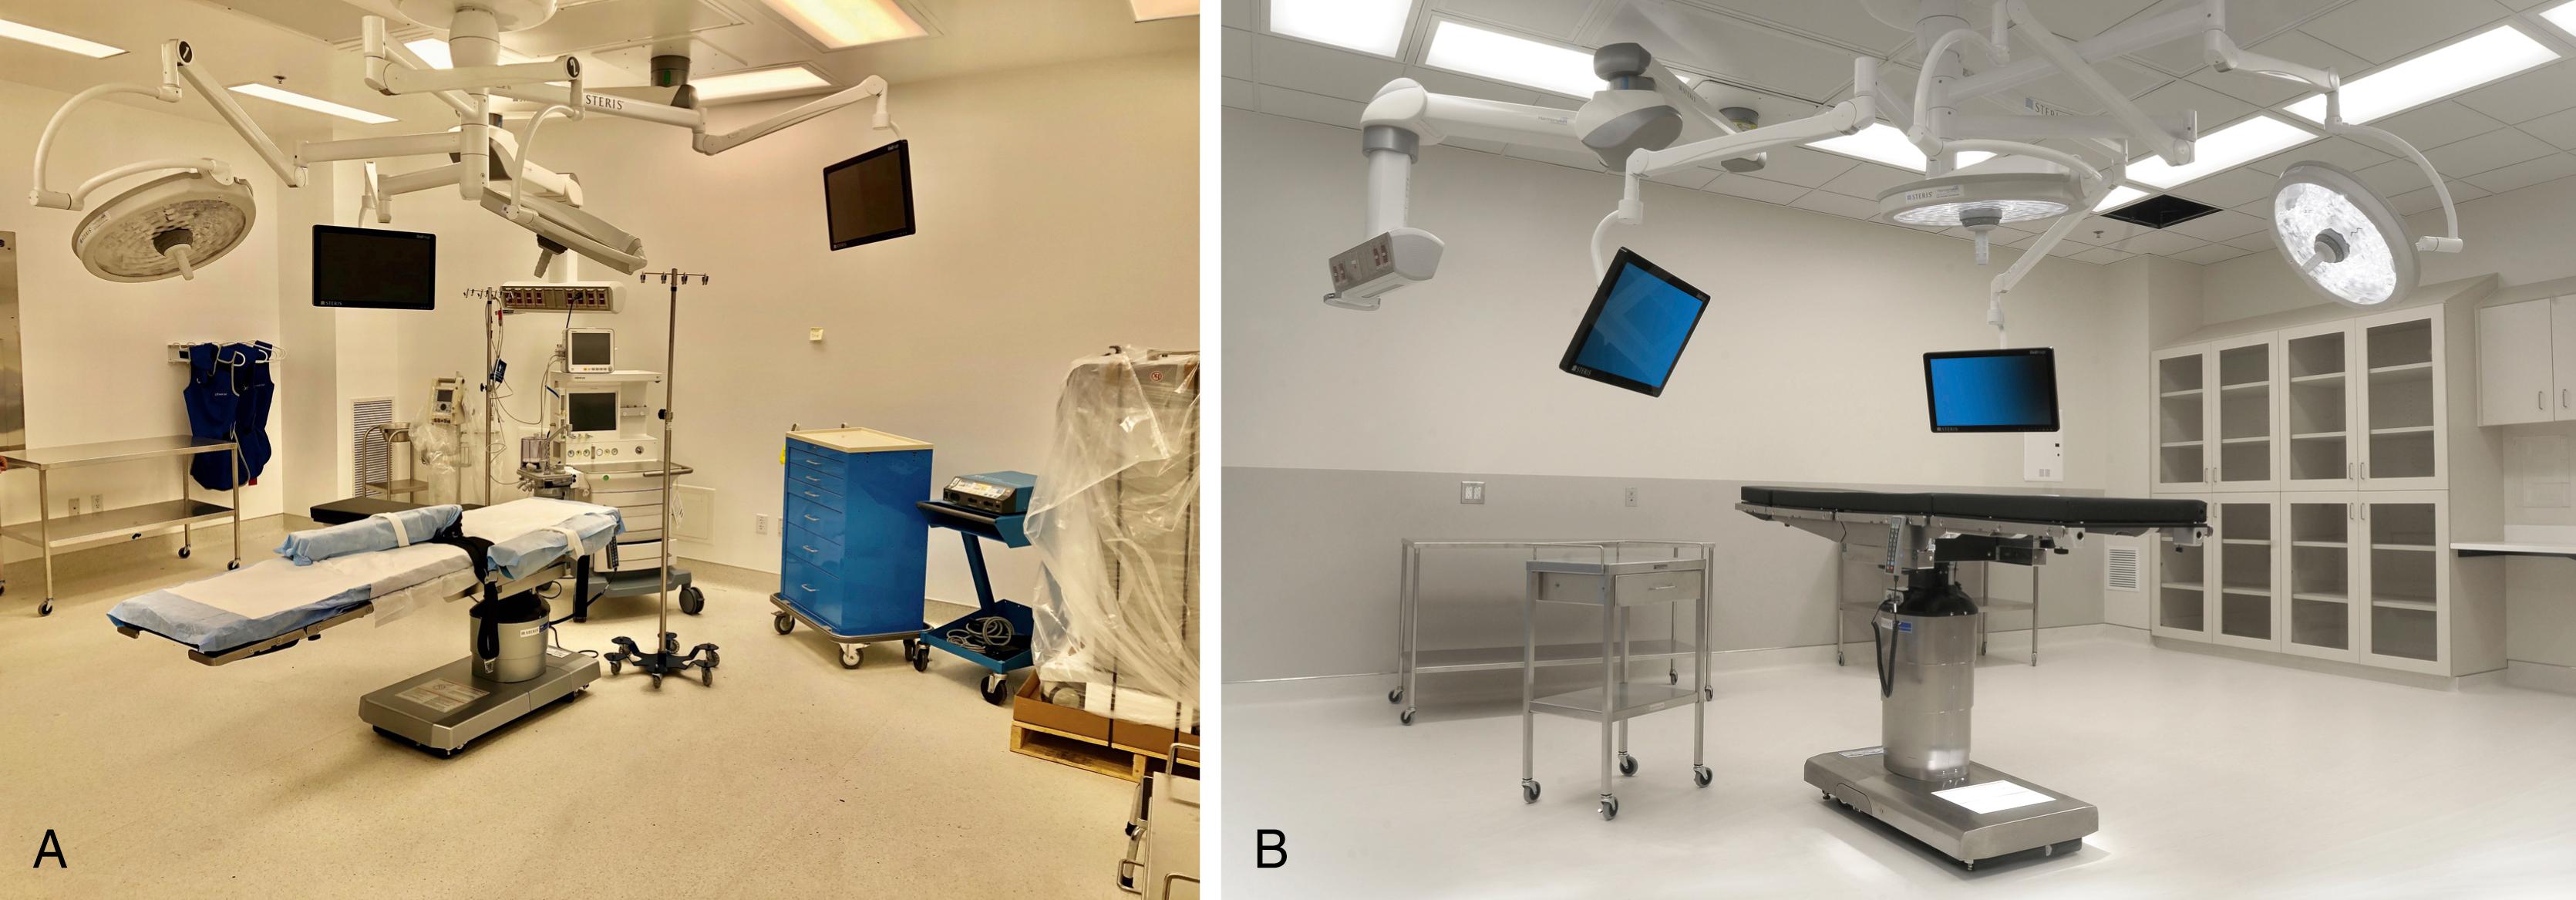 Fig. 4.2, Operating rooms (ORs) in a typical ambulatory surgery center. A, An OR 530 square feet, with two booms. B, An OR 550 square feet with two booms as well as built-in cabinets and workspace.